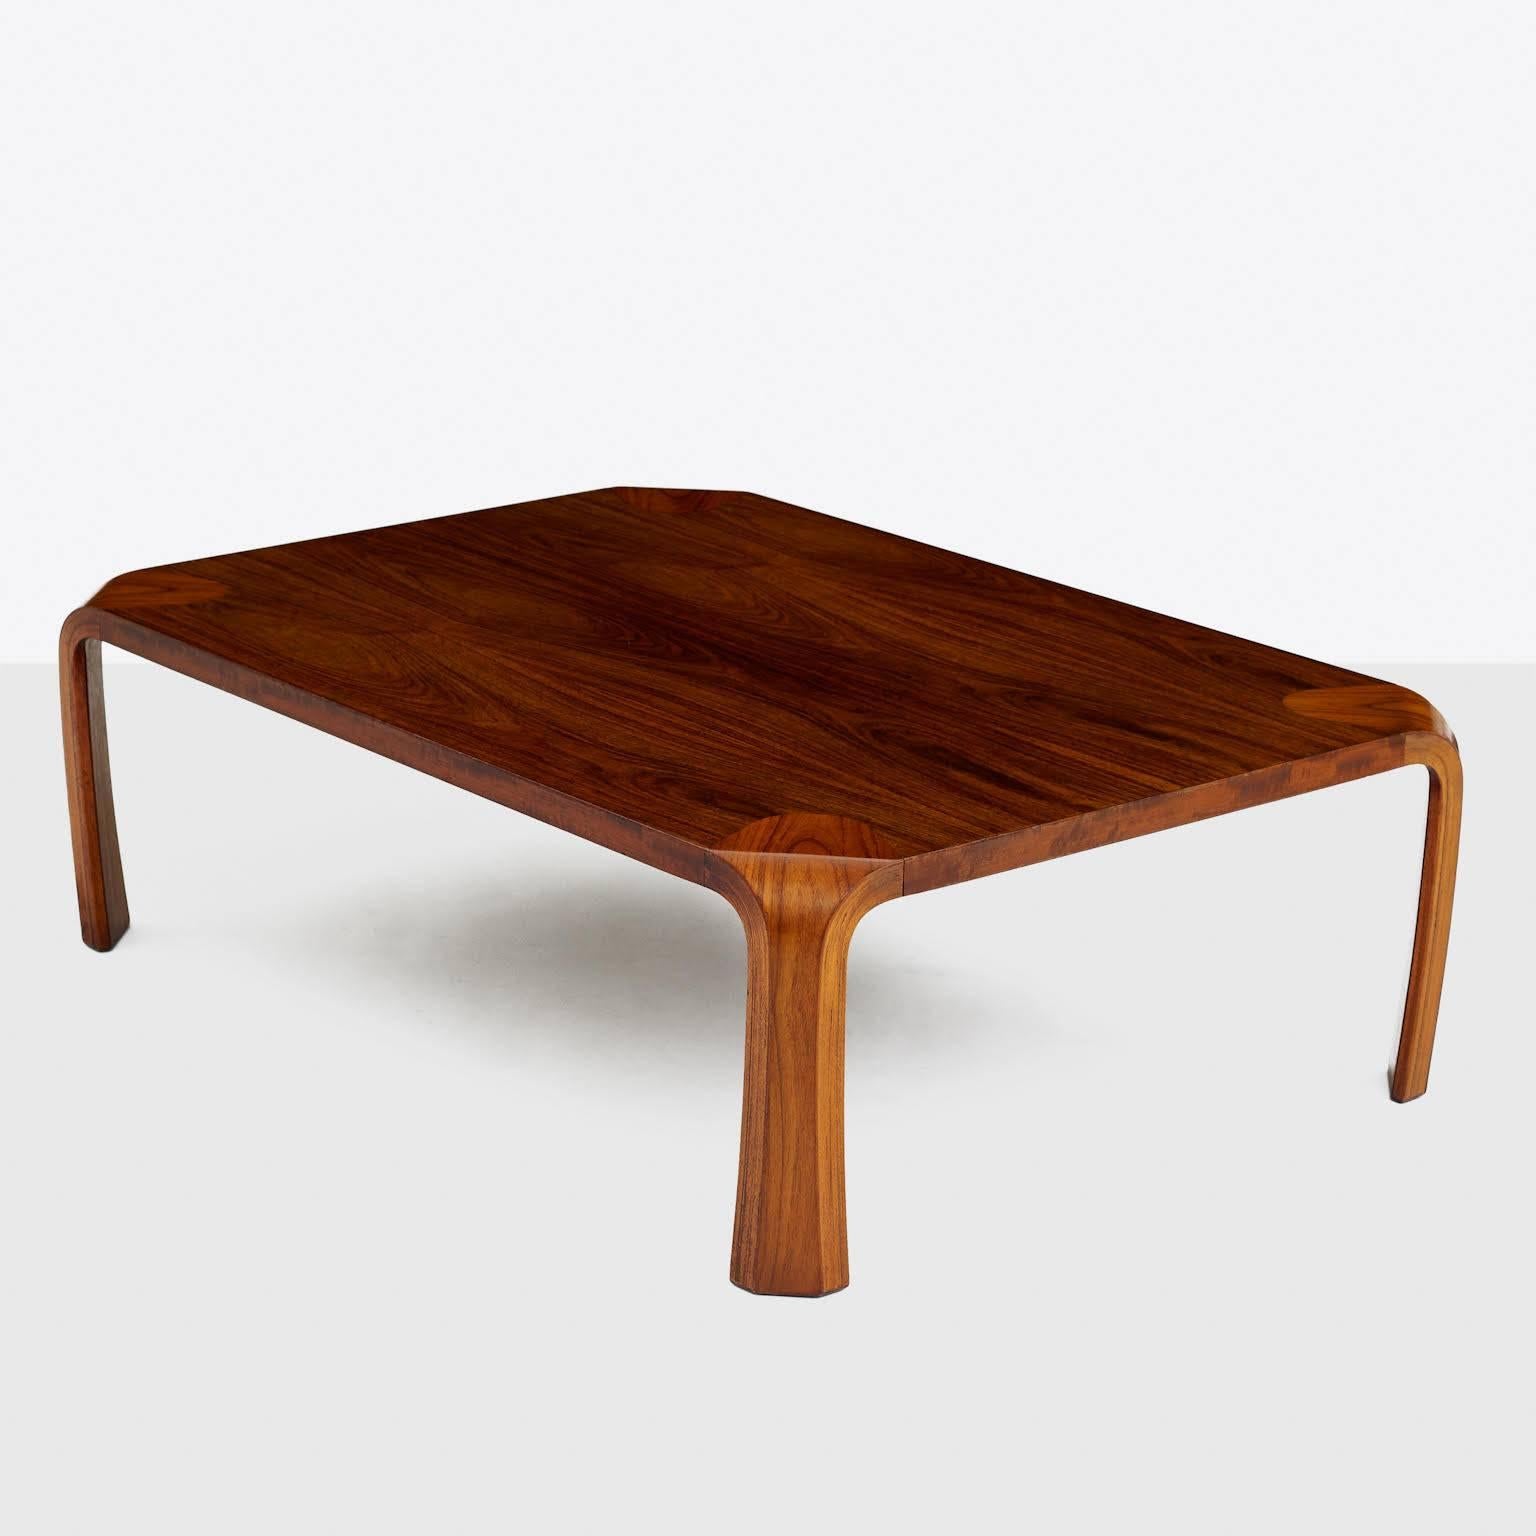 A coffee table in laminated, bent rosewood by Saburo Inui.
Signed with decal manufacturer's label to underside.
Literature: Design Japonais 1950-1995, Centre Georges
Pompidou exhibition catalog, pg. 76.